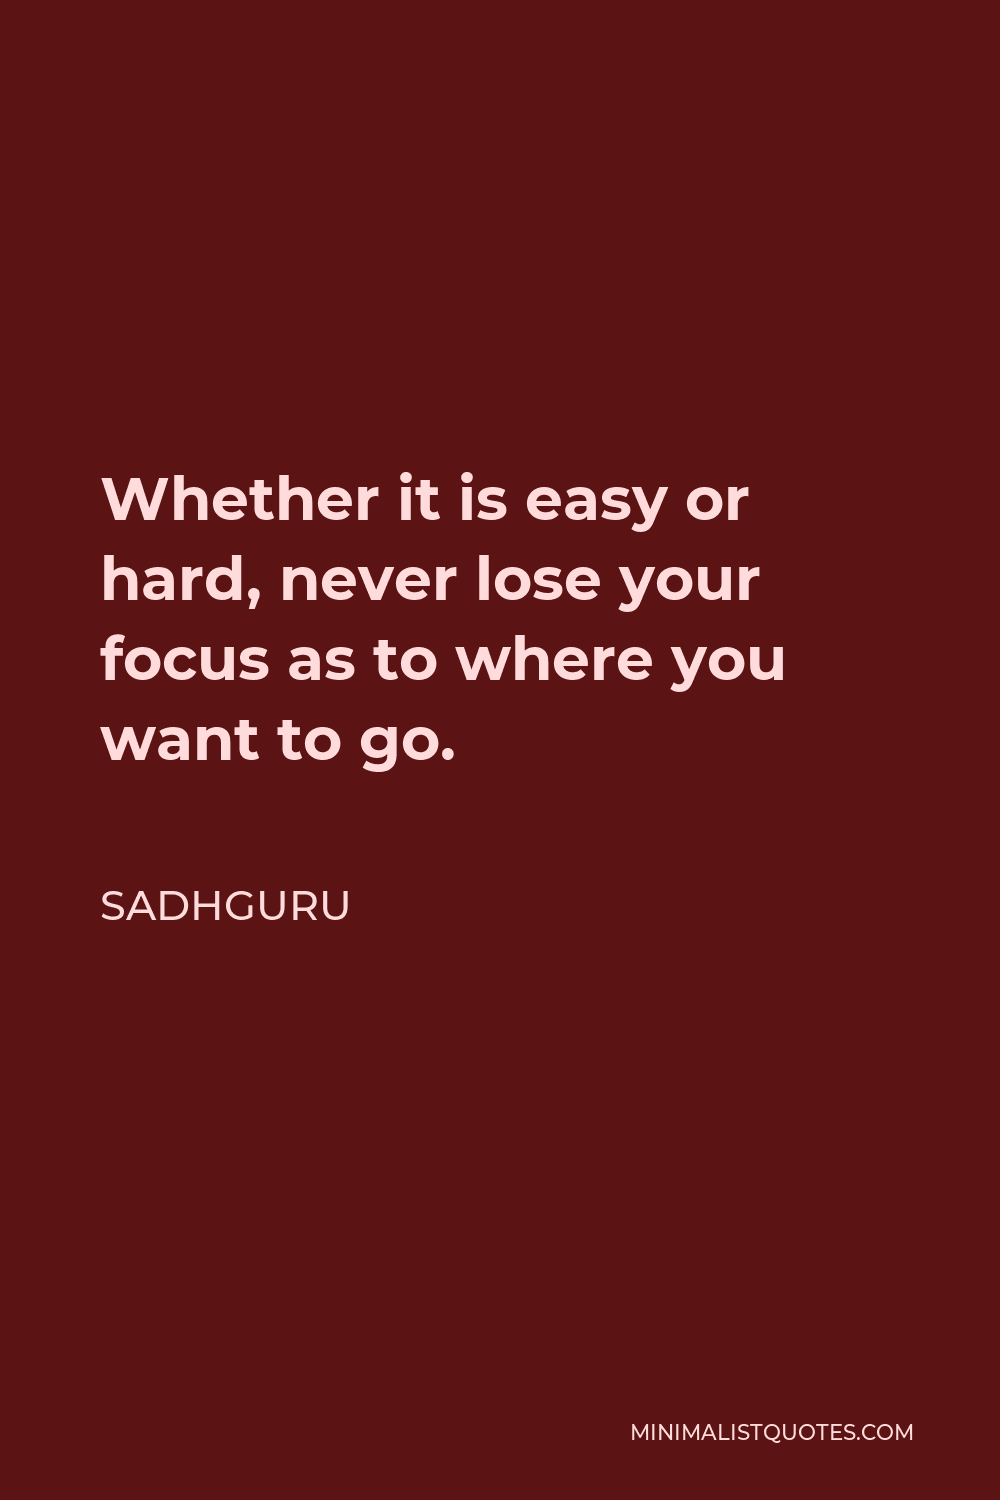 Sadhguru Quote - Whether it is easy or hard, never lose your focus as to where you want to go.